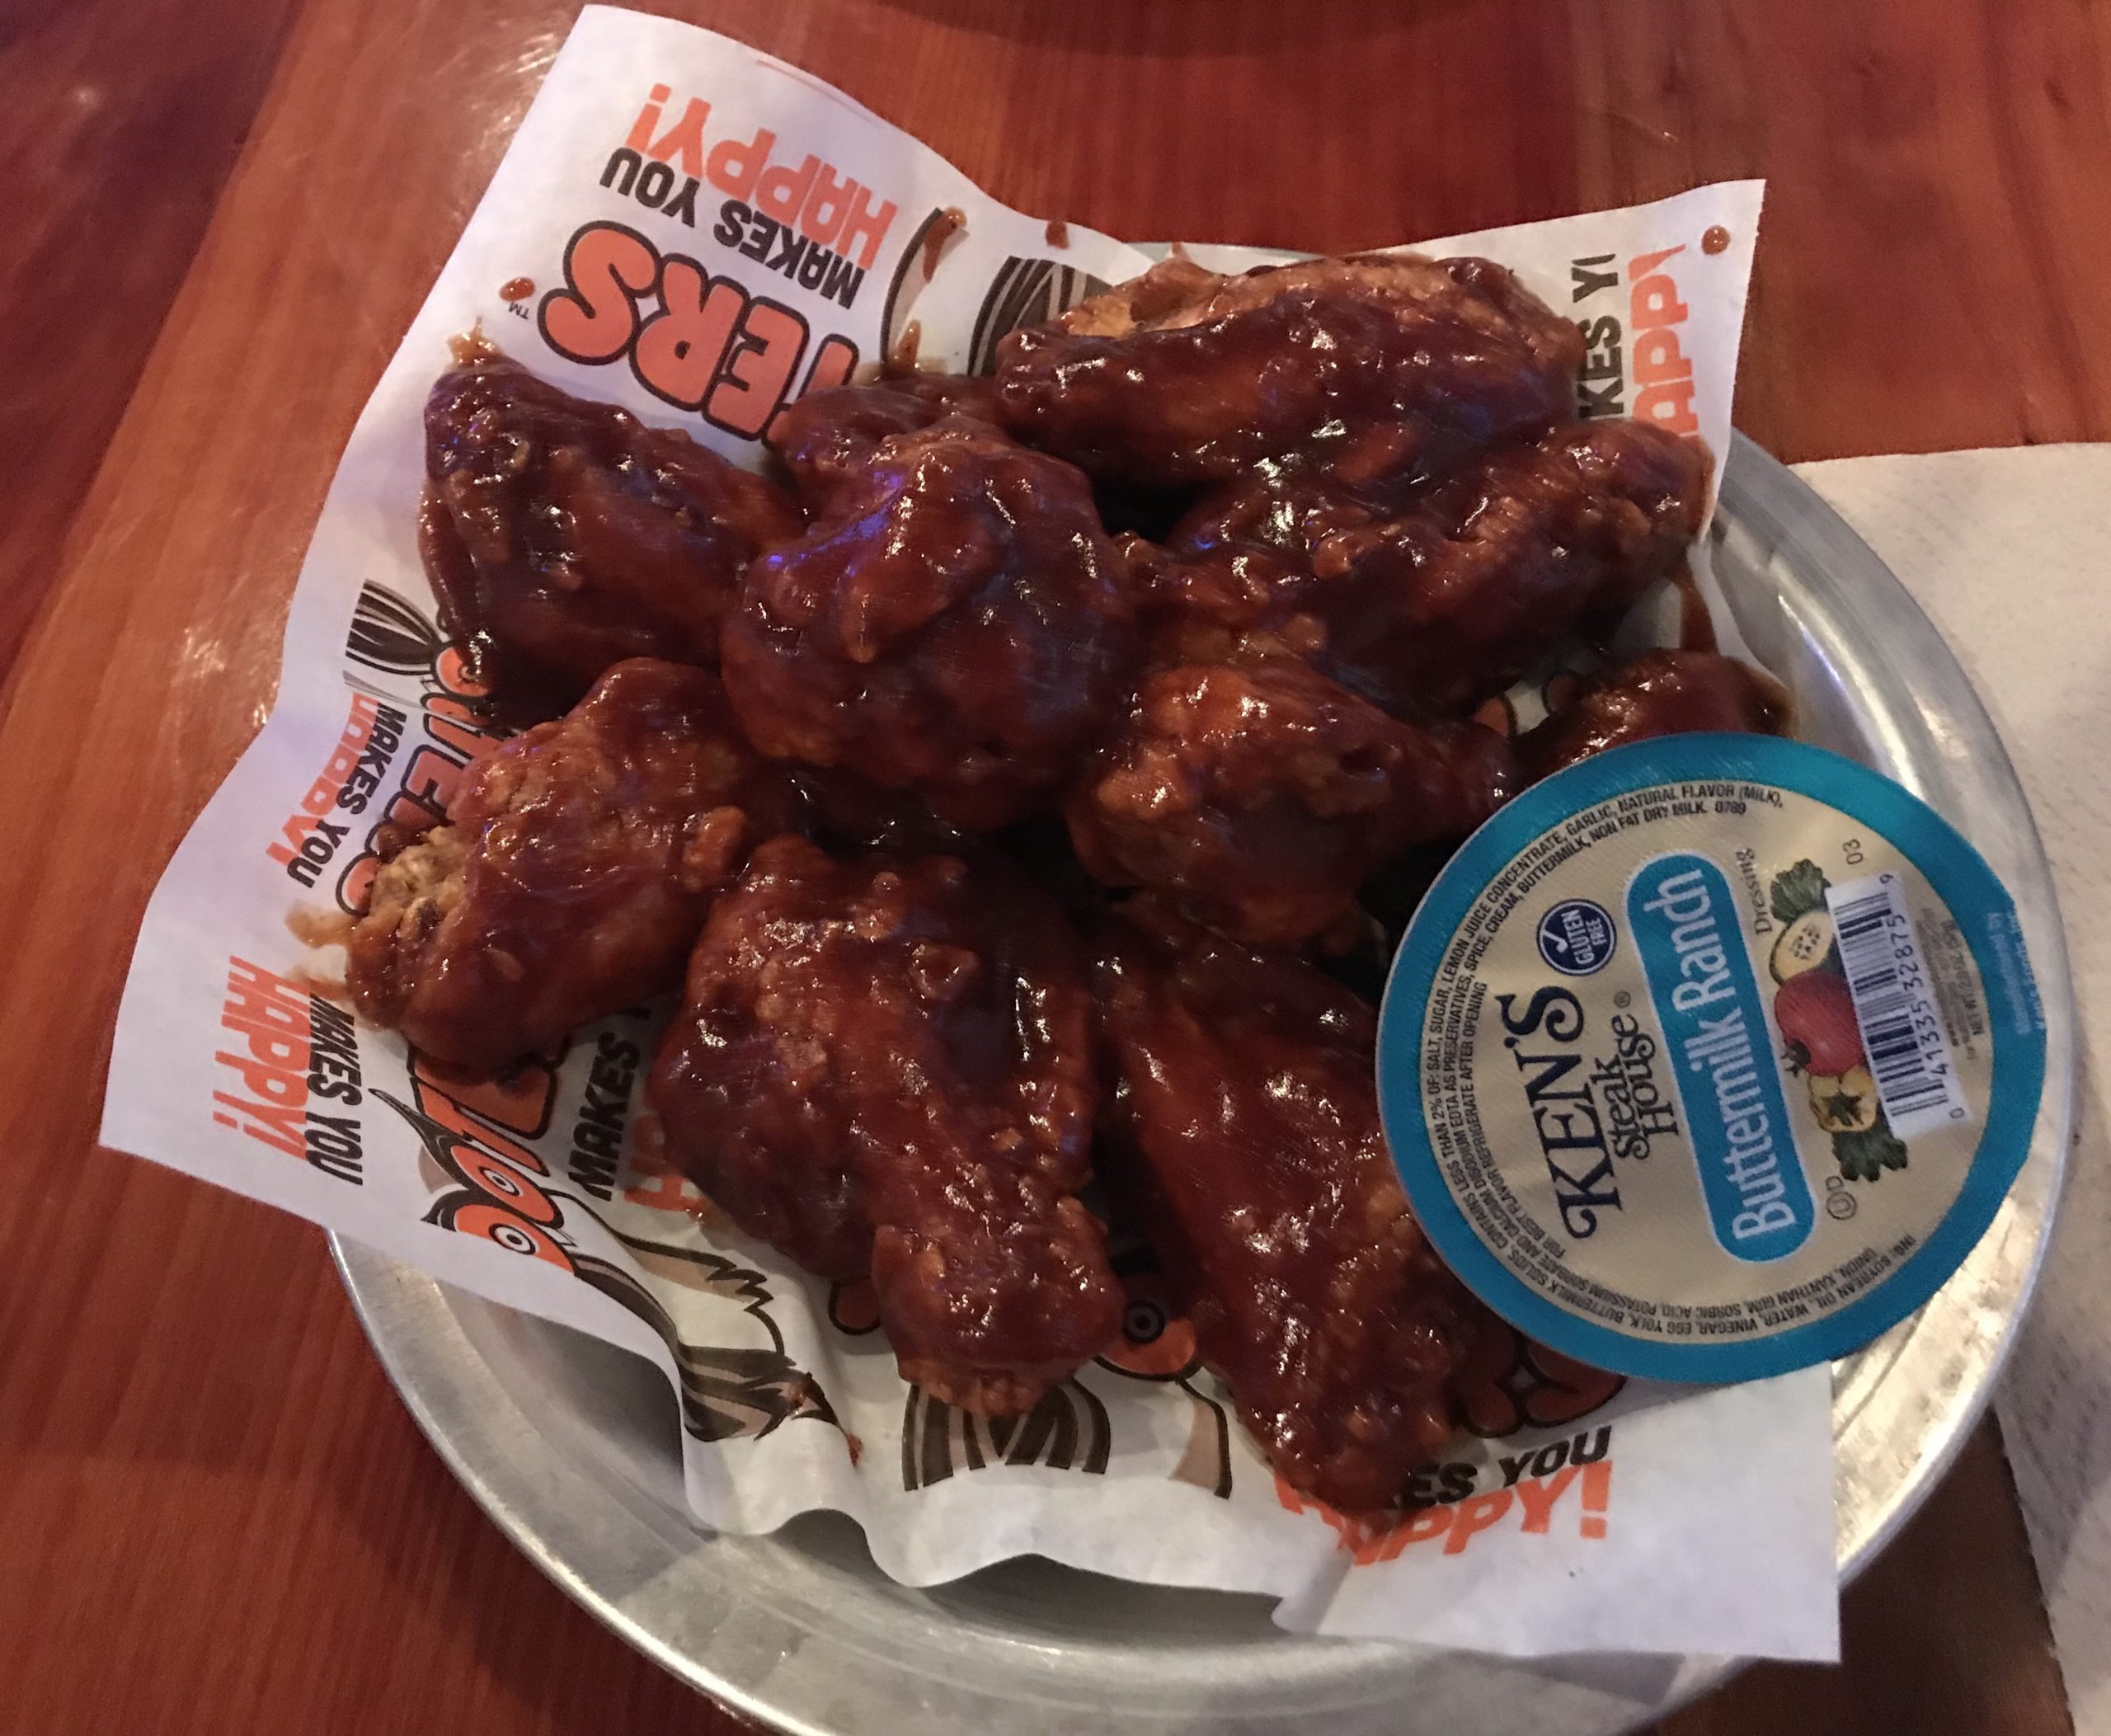 Where to eat in Las Vegas – Hooters!